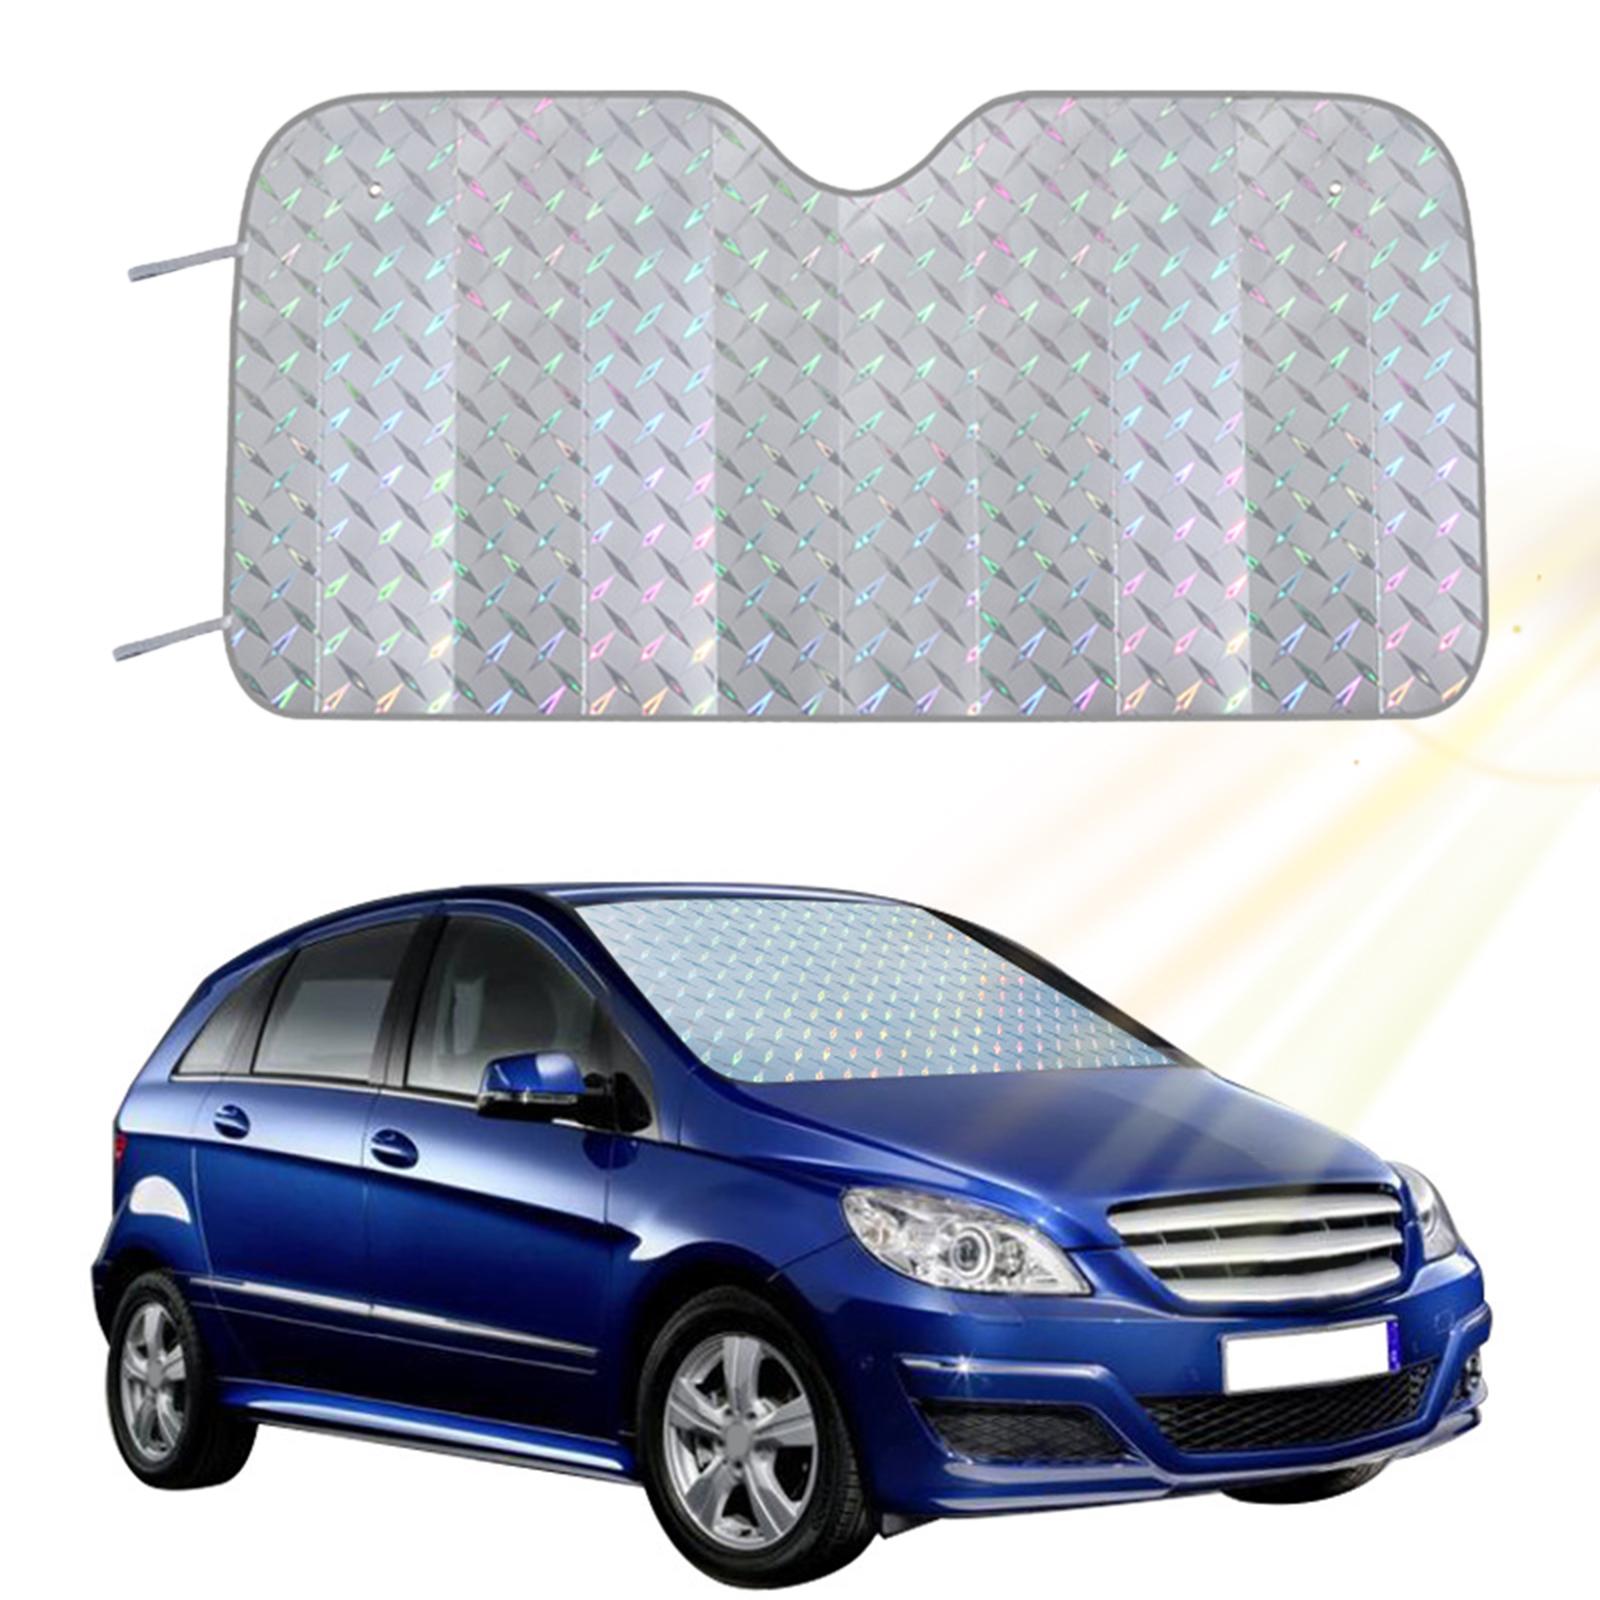 Car Windshield Sunshade Sun Protection Car Parts Save Space Windshield Cover 130cmx60cm